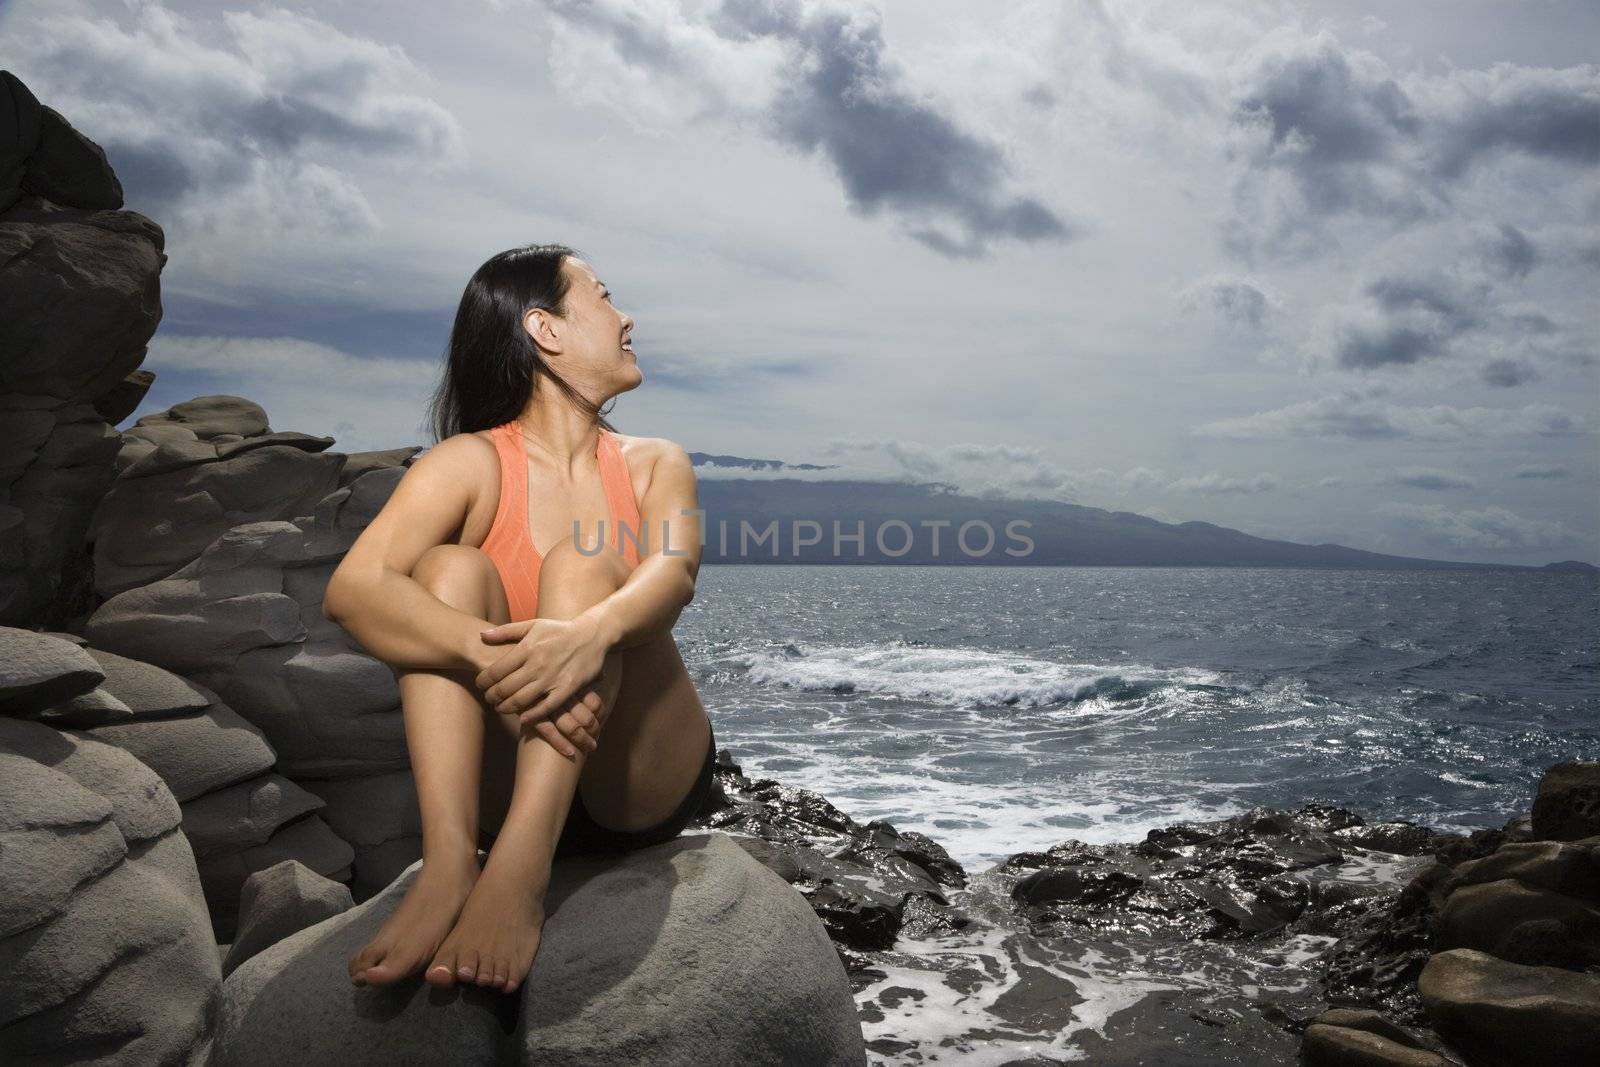 Asian woman sitting on rock by ocean looking over shoulder smiling in Maui, Hawaii